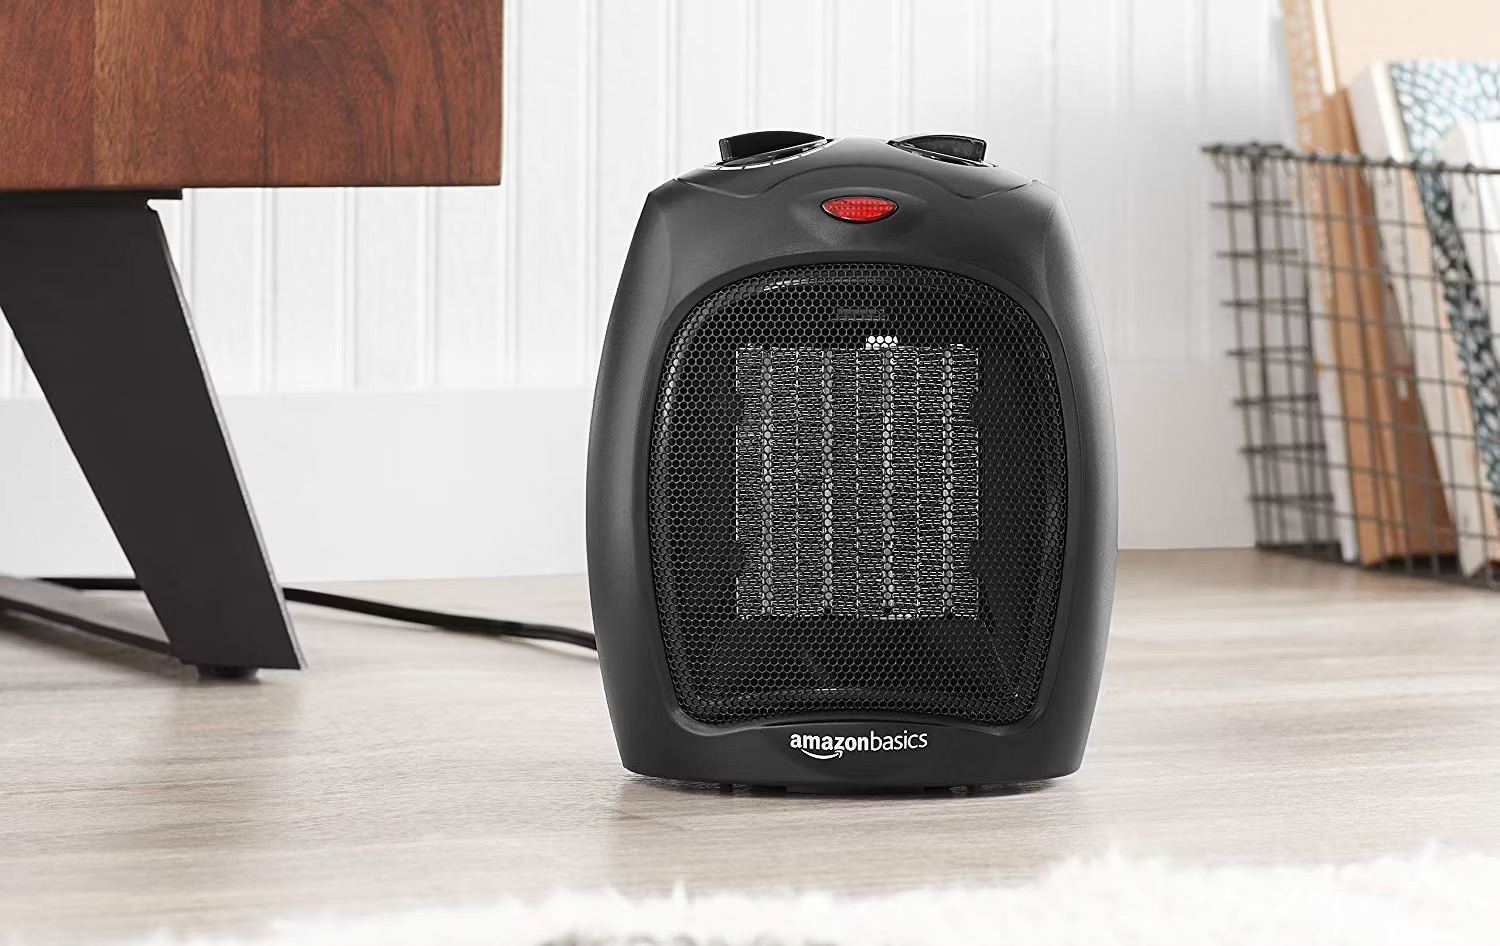 Is This Smart Space Heater An Antidote To Pricey Electric Bills?